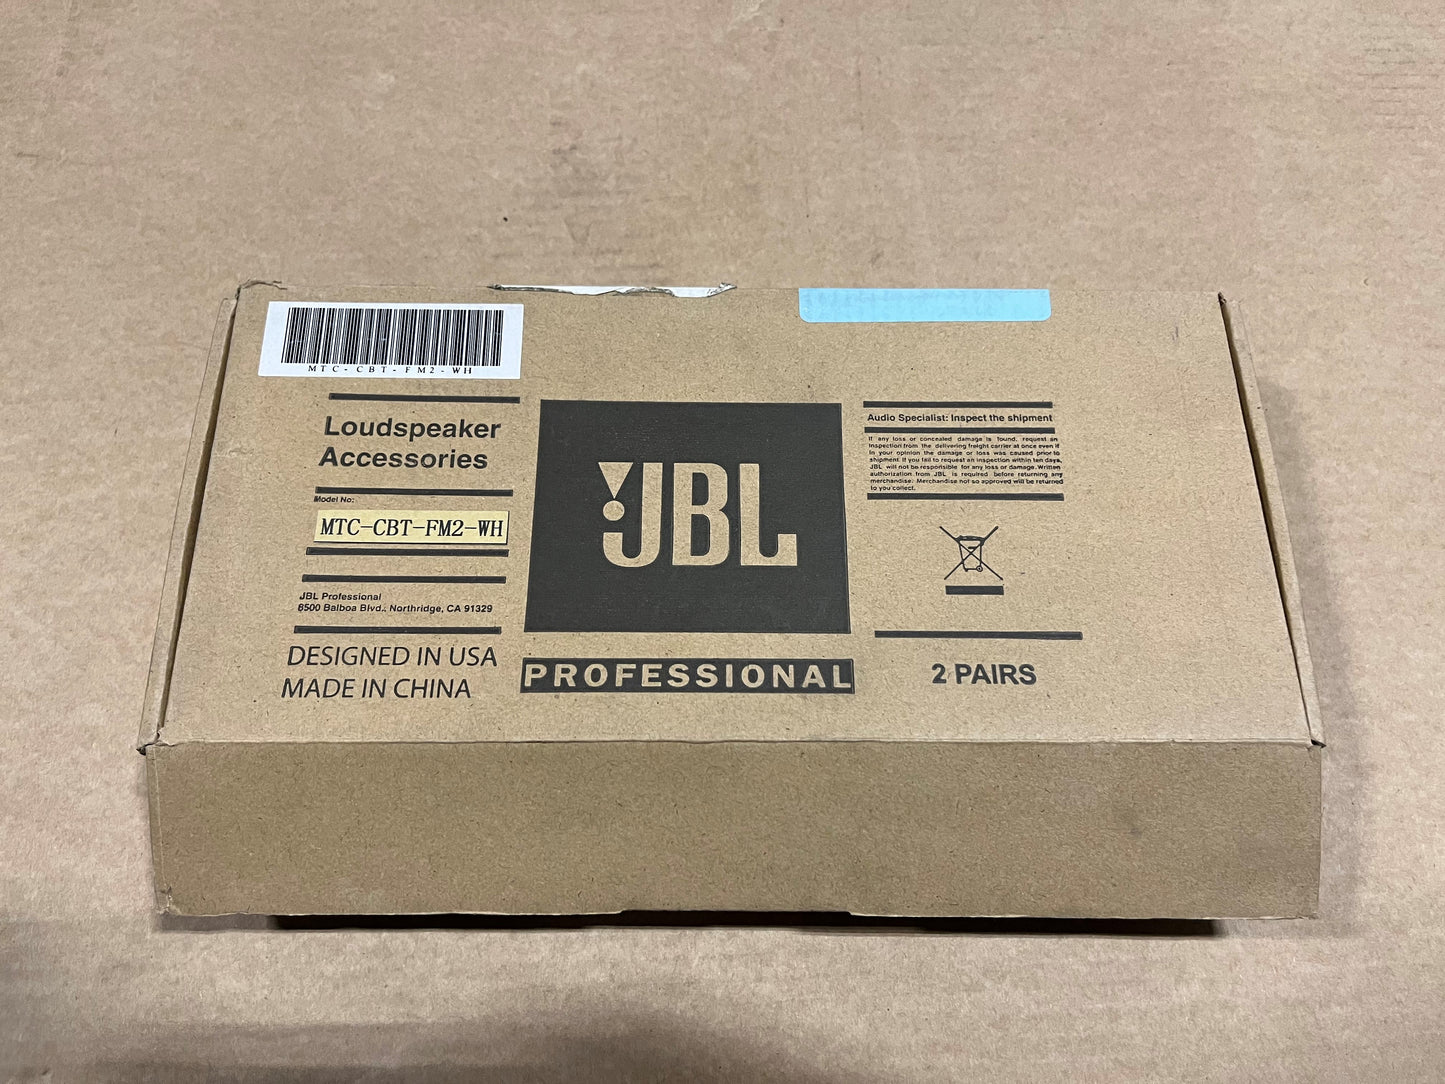 JBL MTC-CBT-FM2-WH Mounting Brackets , 2 Pairs , NIB. 					We Sell Professional Audio Equipment. Audio Systems, Amplifiers, Consoles, Mixers, Electronics, Entertainment, Sound, Live.